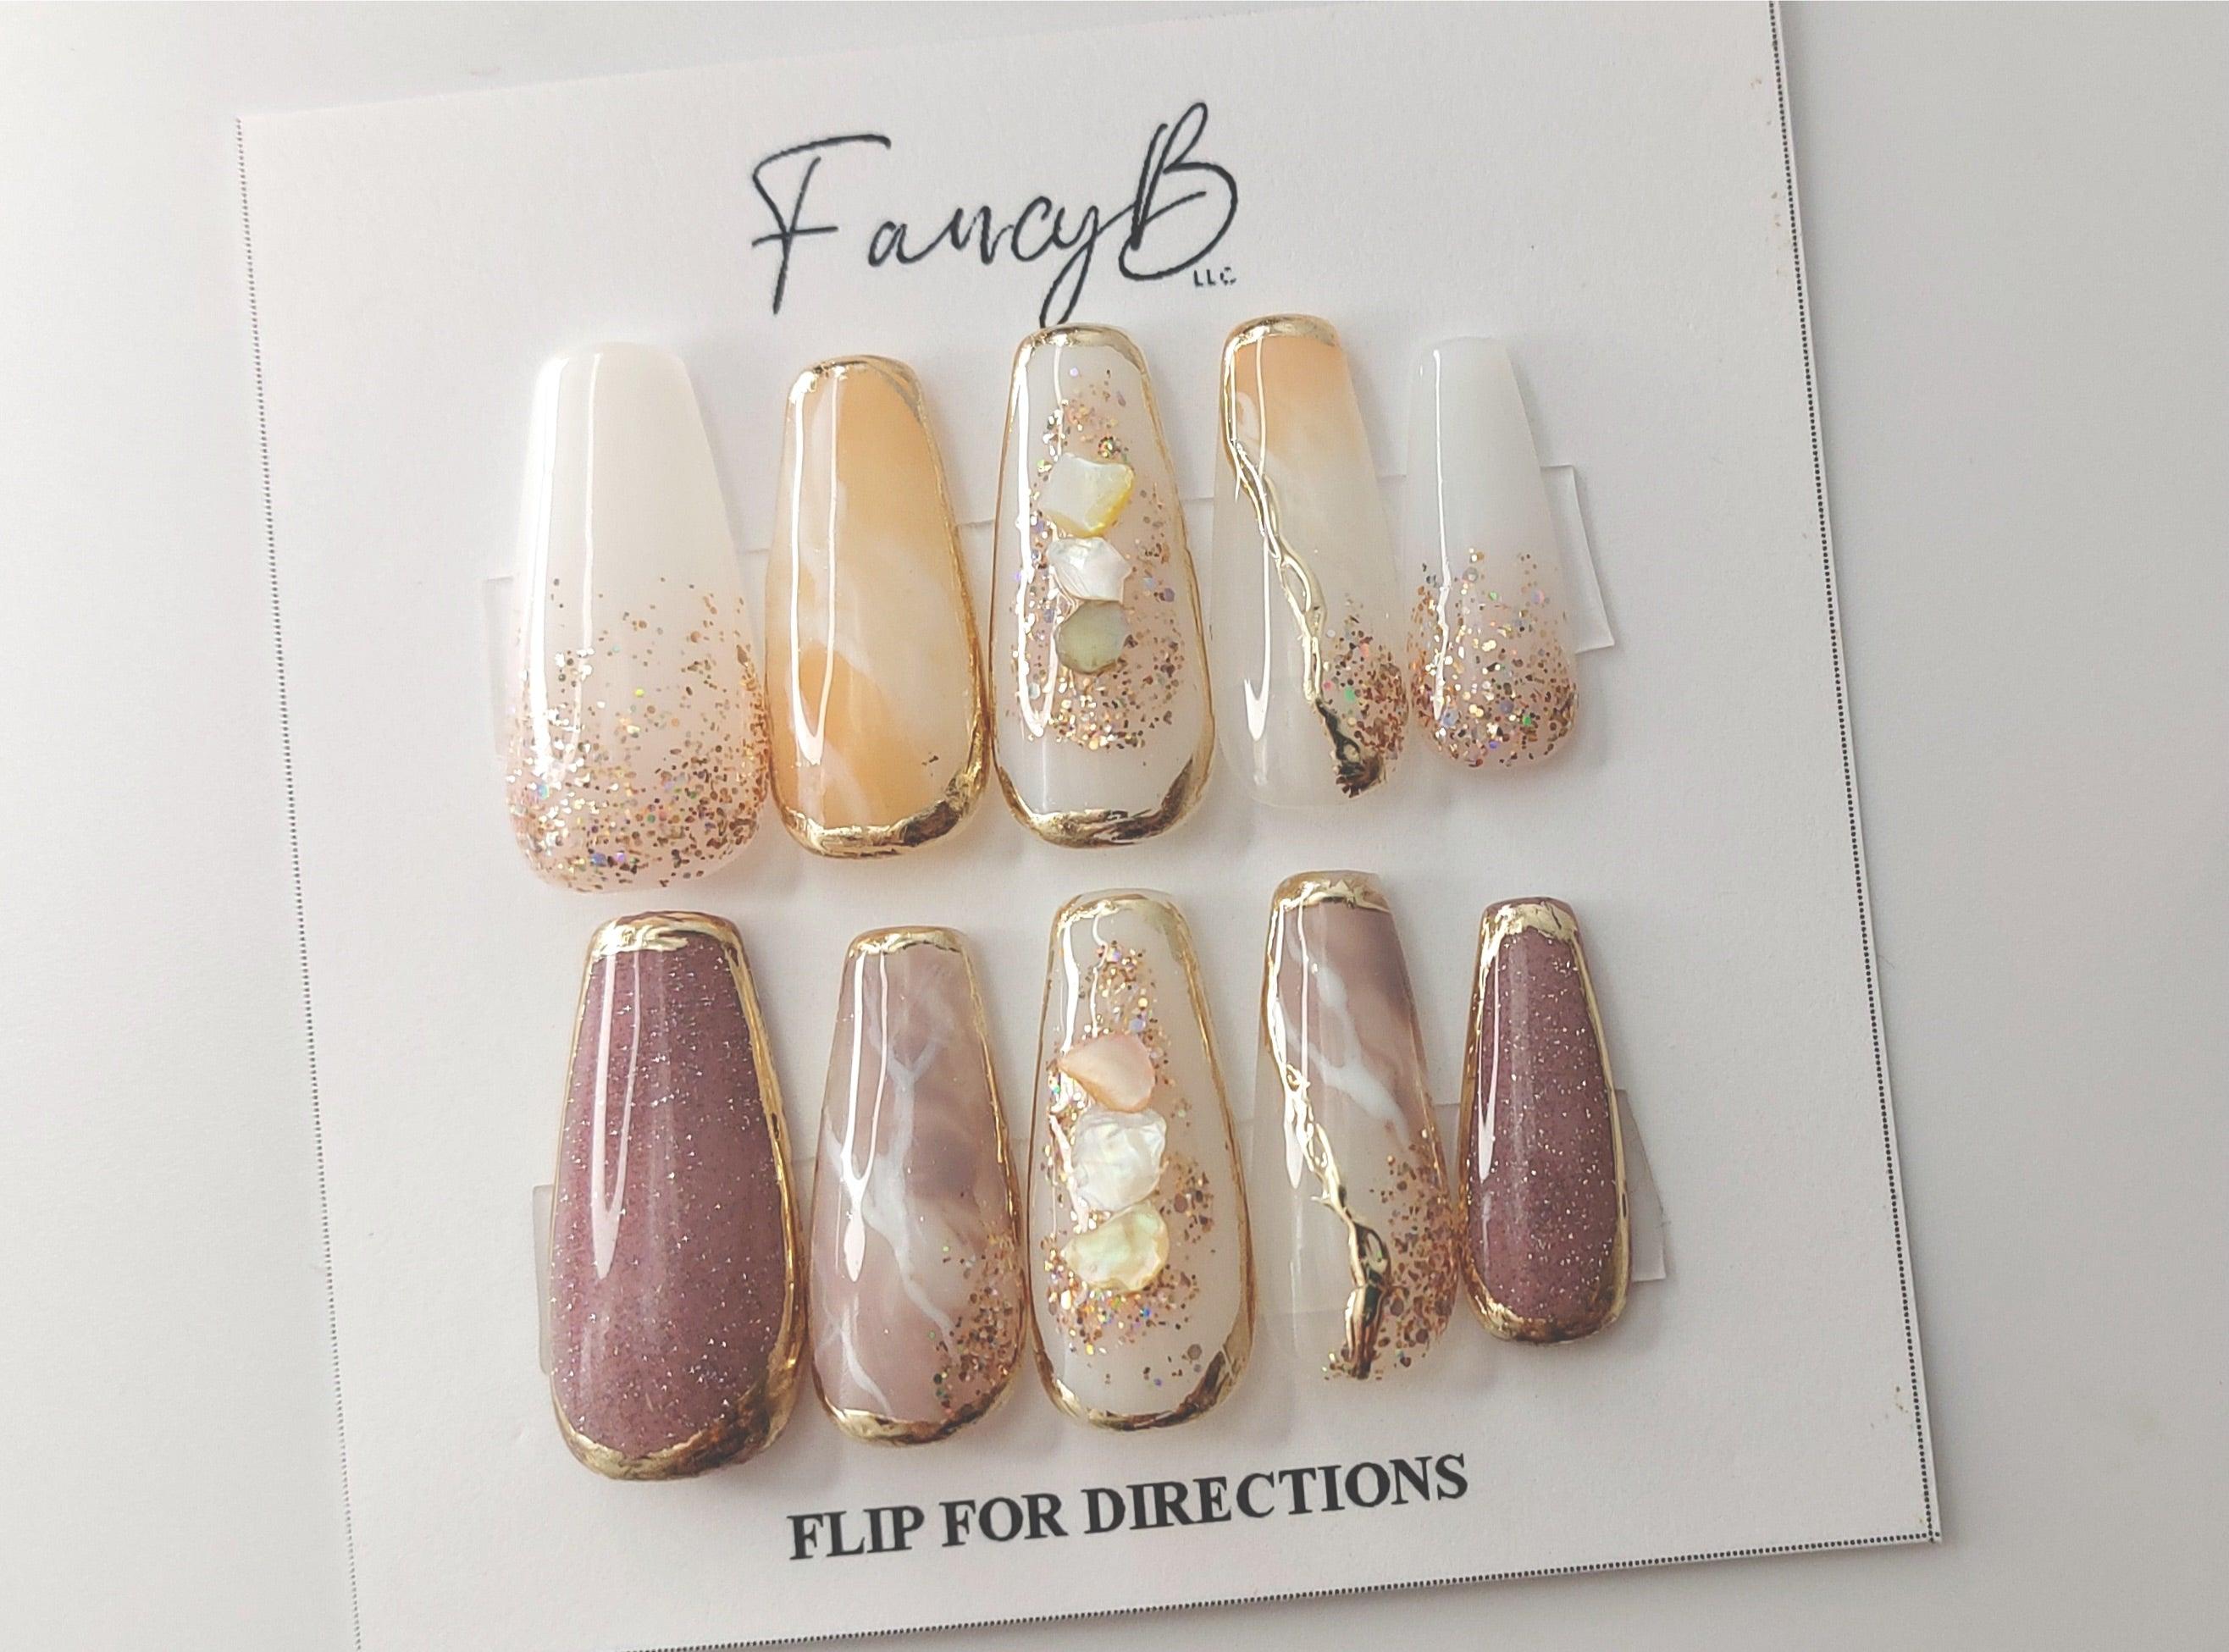 Fake Nails With Diamonds You Have 24 Nails Plus a File - Etsy